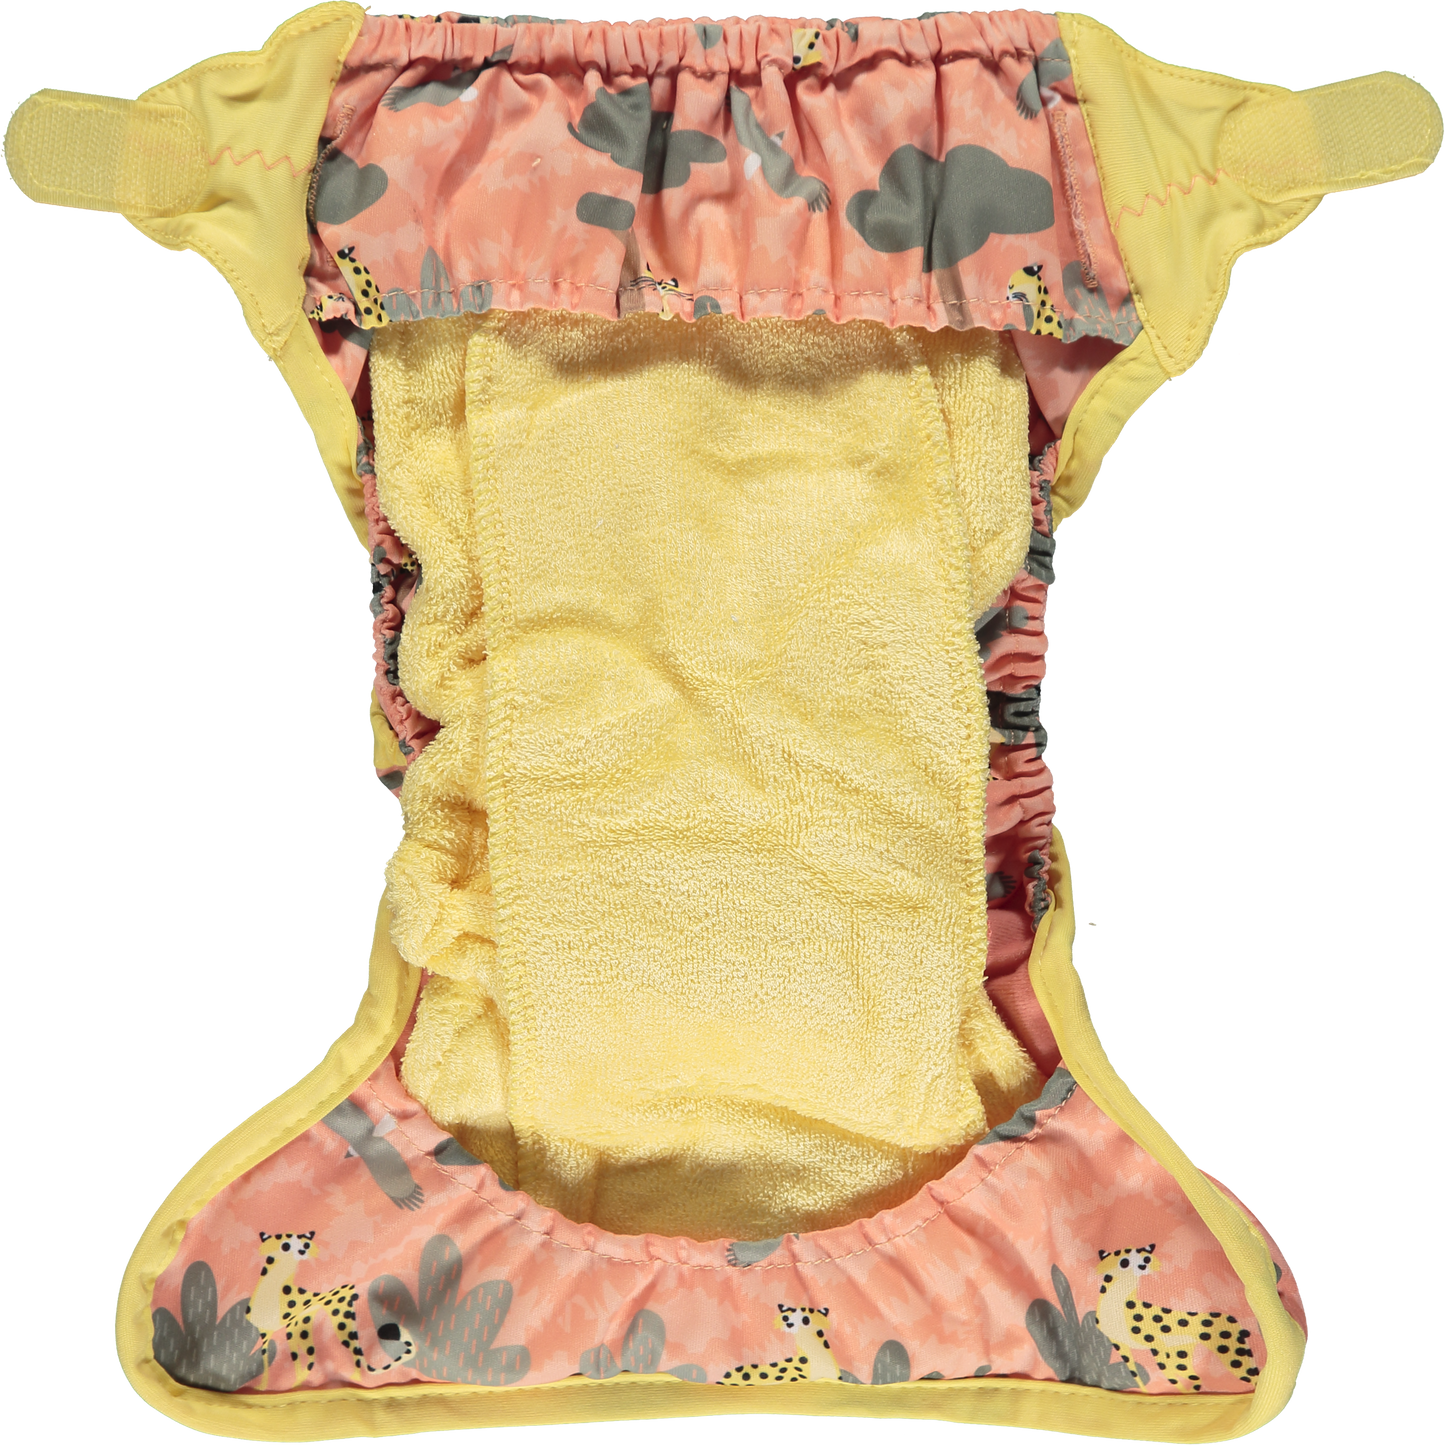 Inside Of Peach Yellow Pop-in One Size Cheetah Reusable Cloth Nappy, With Velcro Fastening